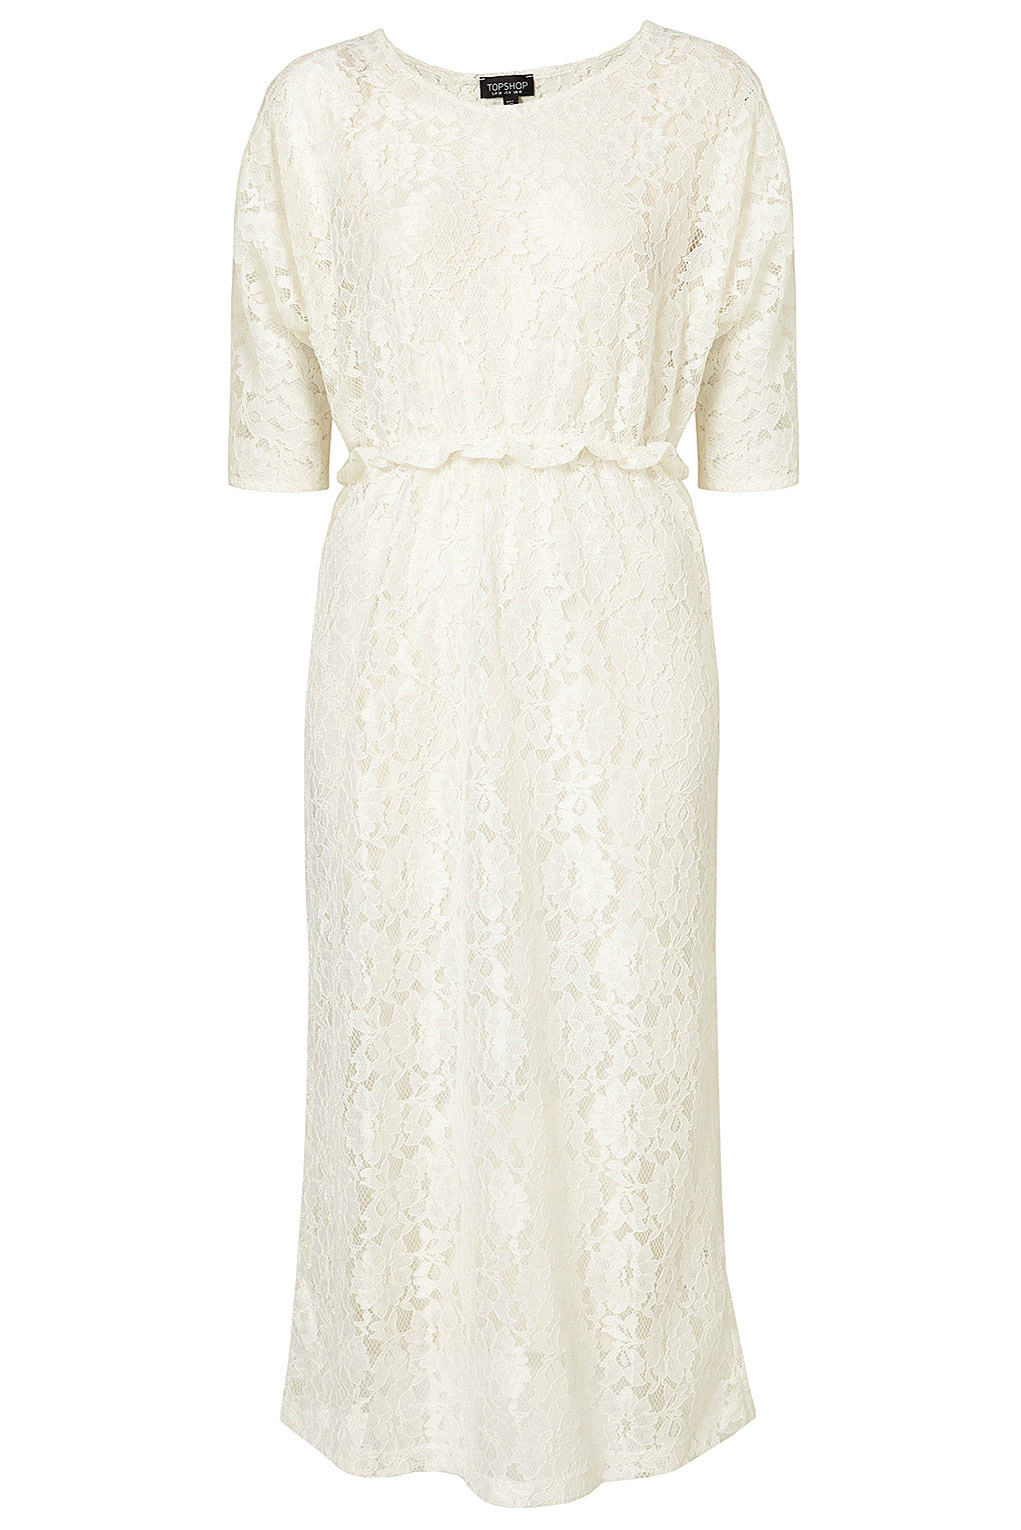 Topshop Lace Midi Dress in Natural | Lyst